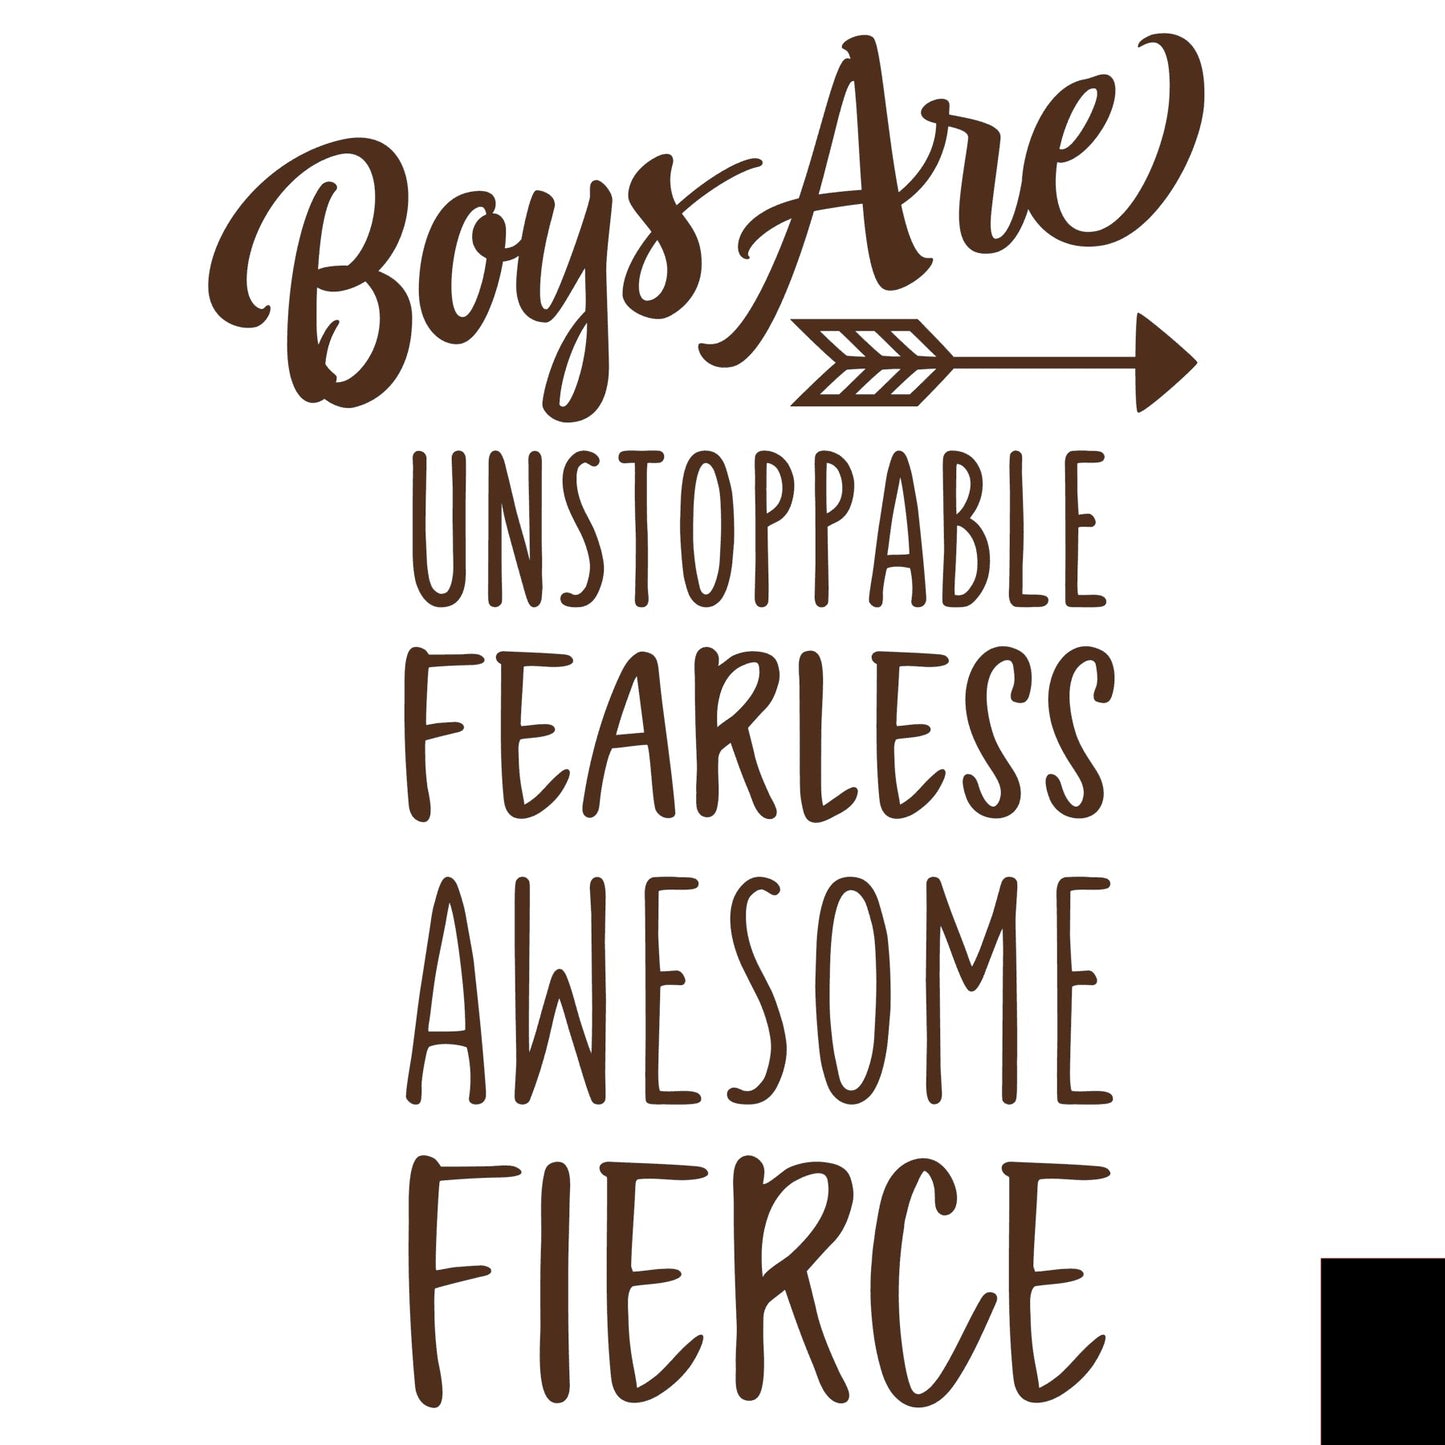 Boys Are Unstoppable Fearless Awesome Fierce